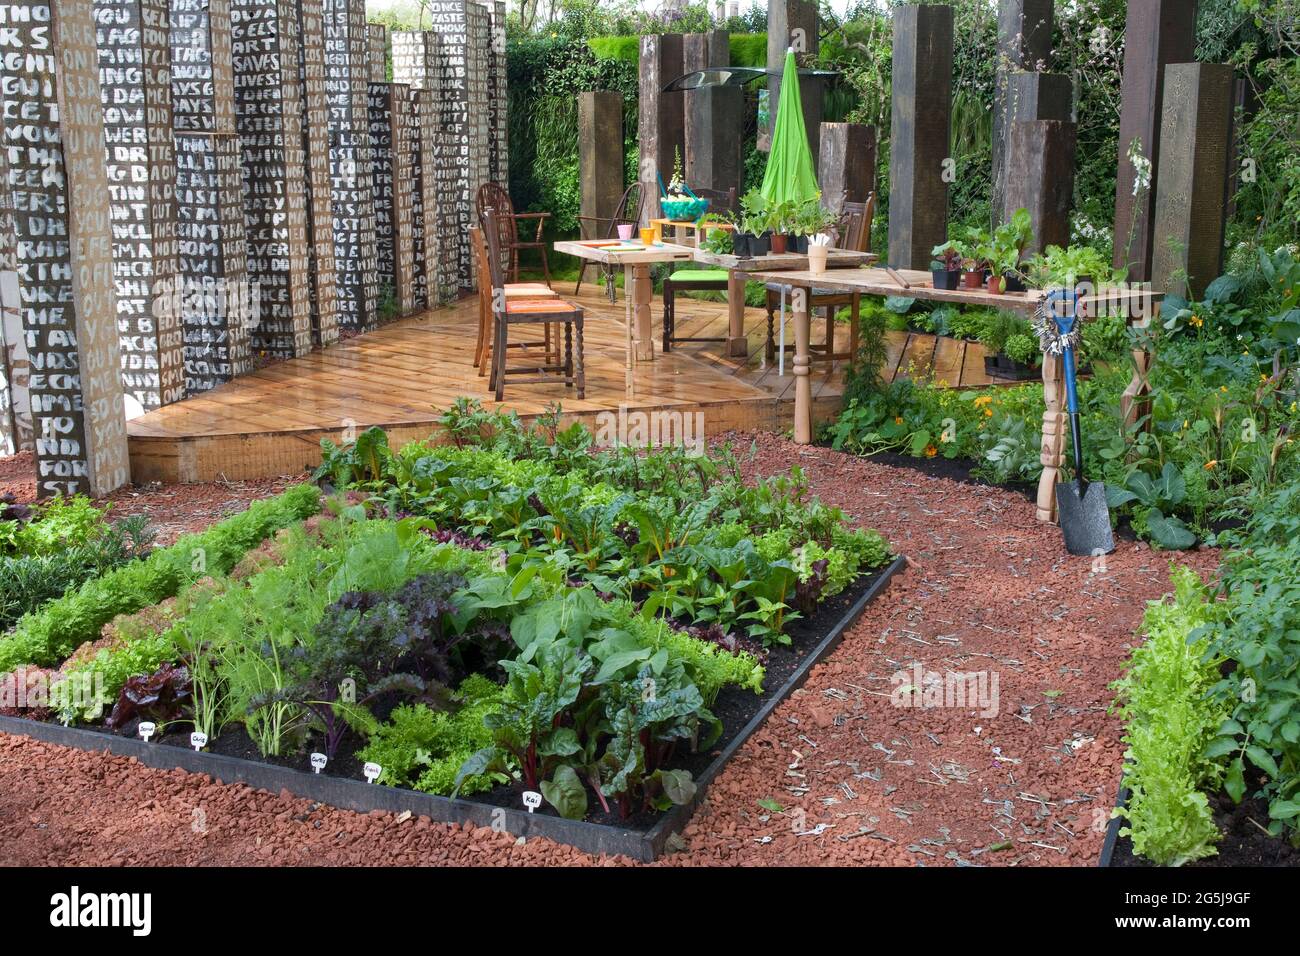 The Key' featuring a vegetable garden, decking and seating area made from recycled or sustainable sources. Designed by Paul Stone of the Eden Project and plants grown by homeless people and prisoners. Stock Photo